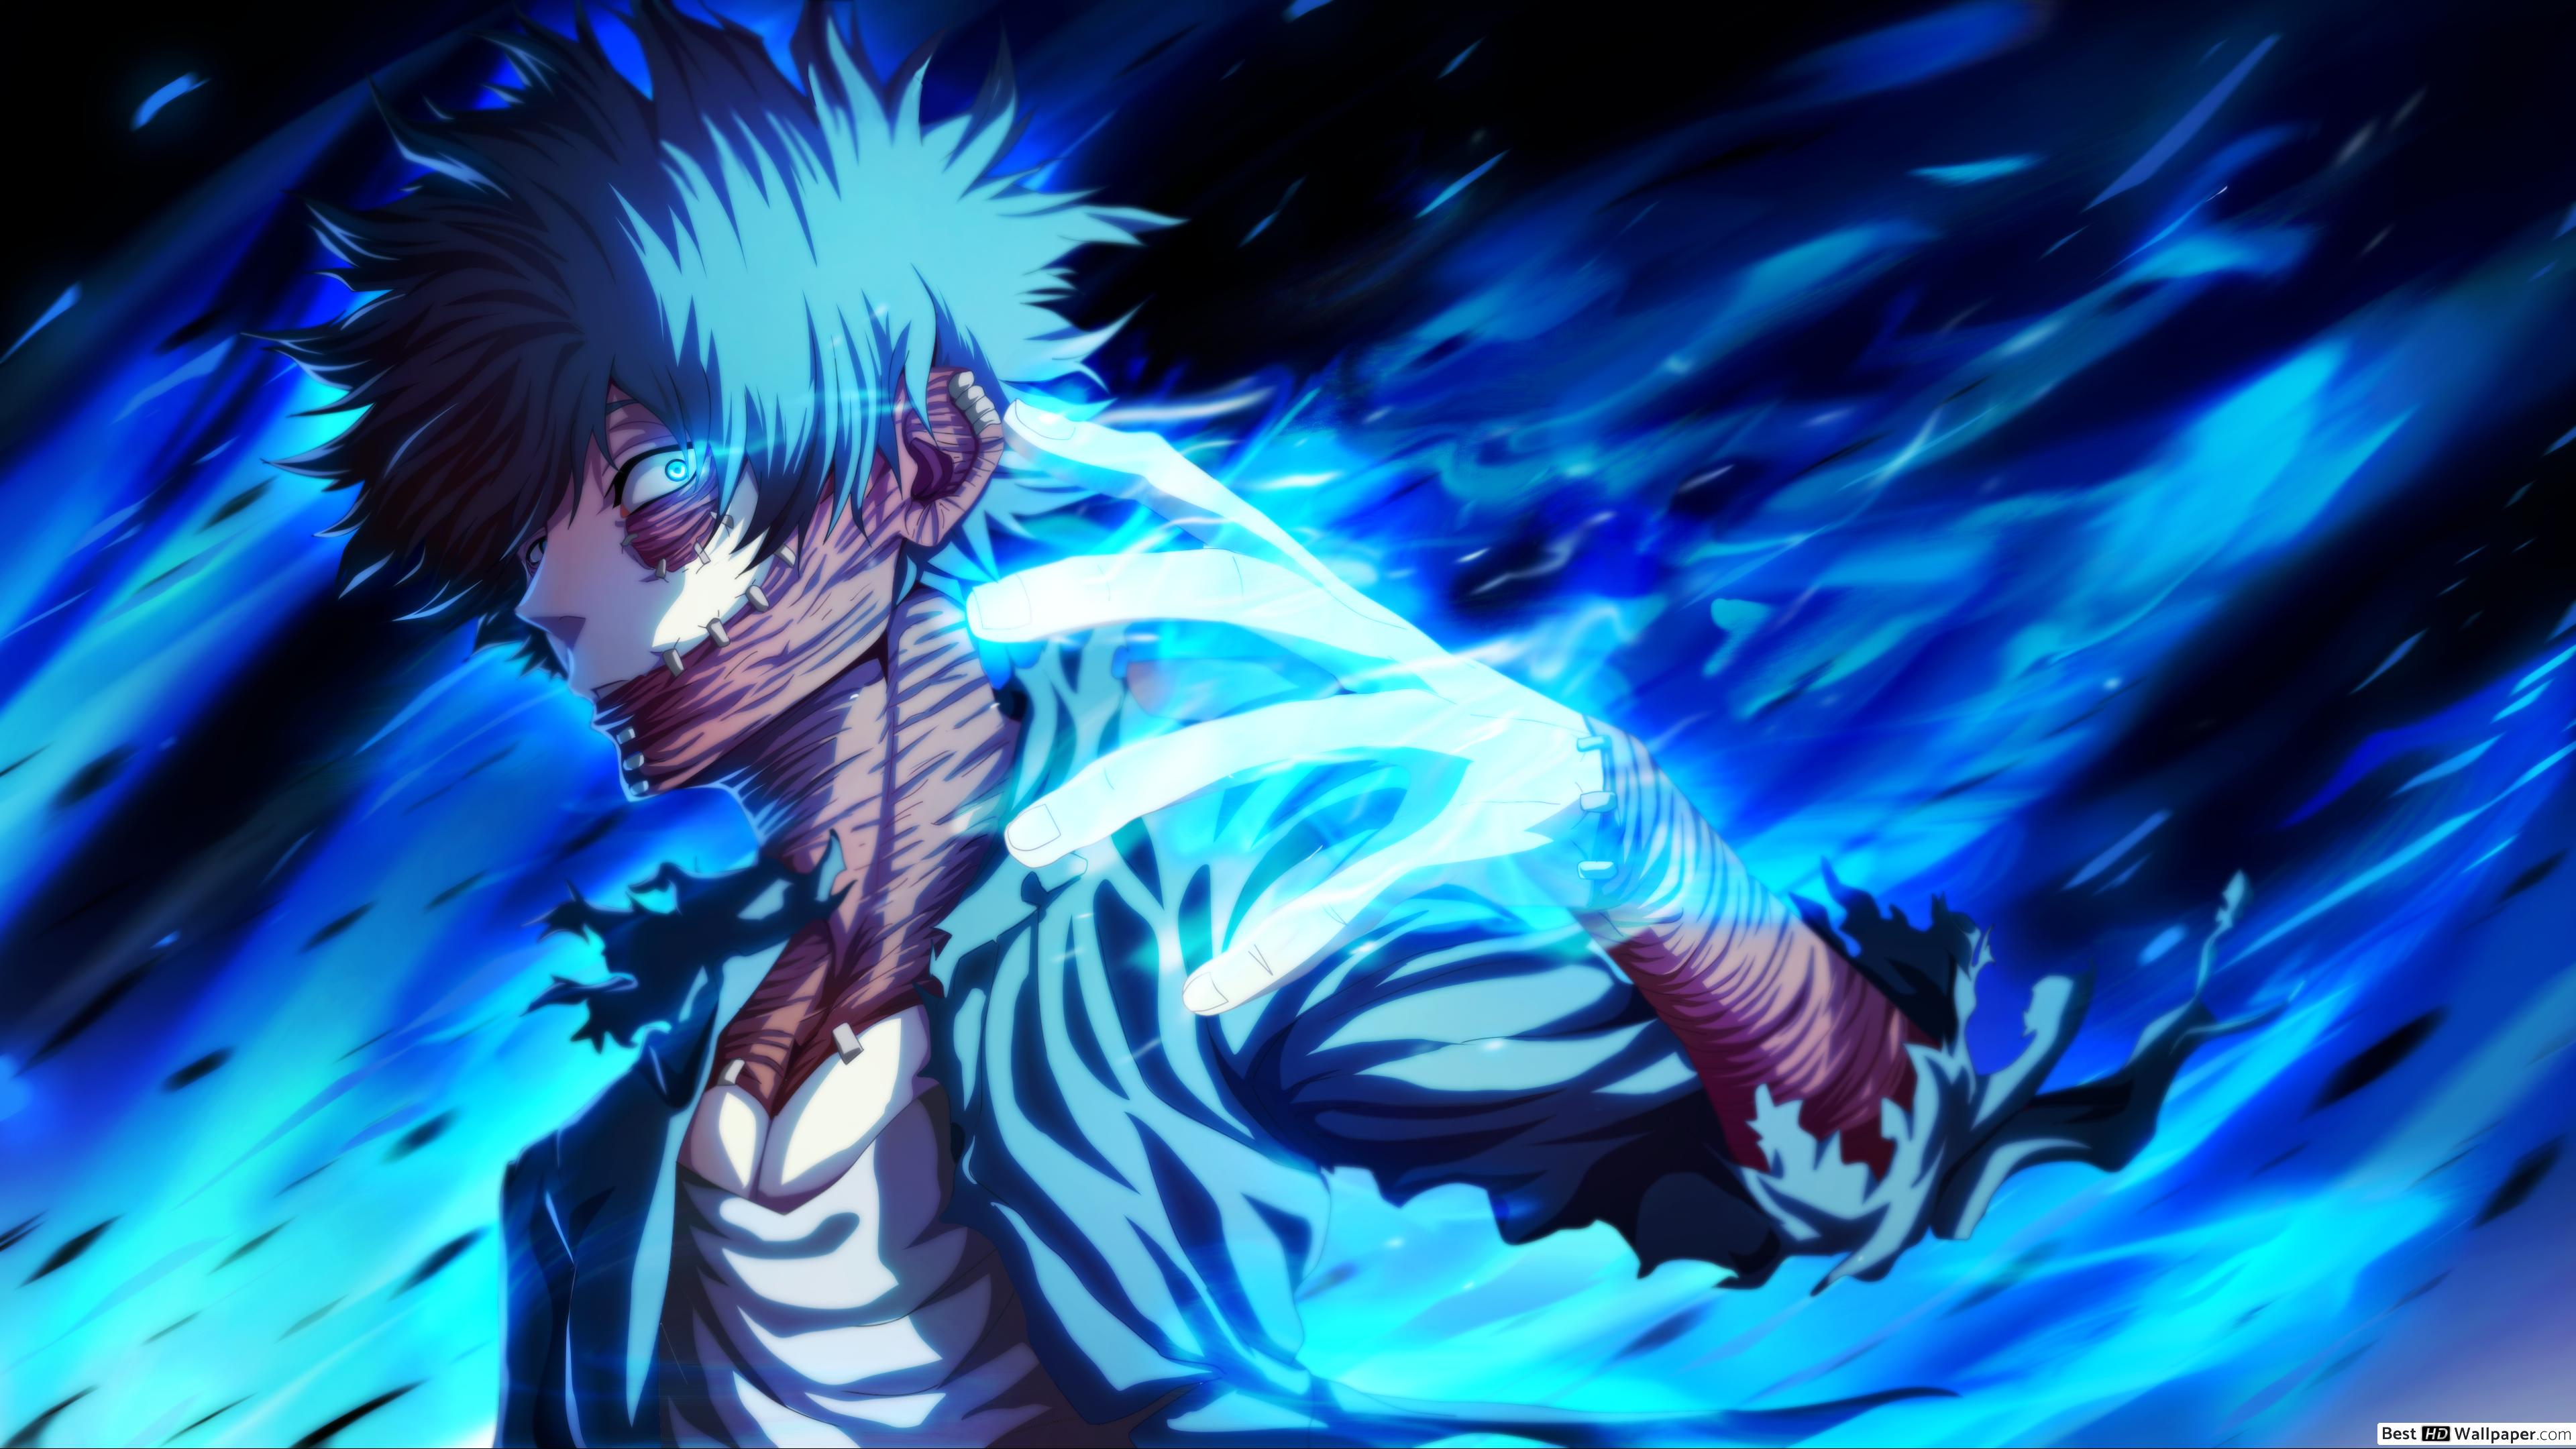 Anime Cover Photo For Youtube , HD Wallpaper & Backgrounds